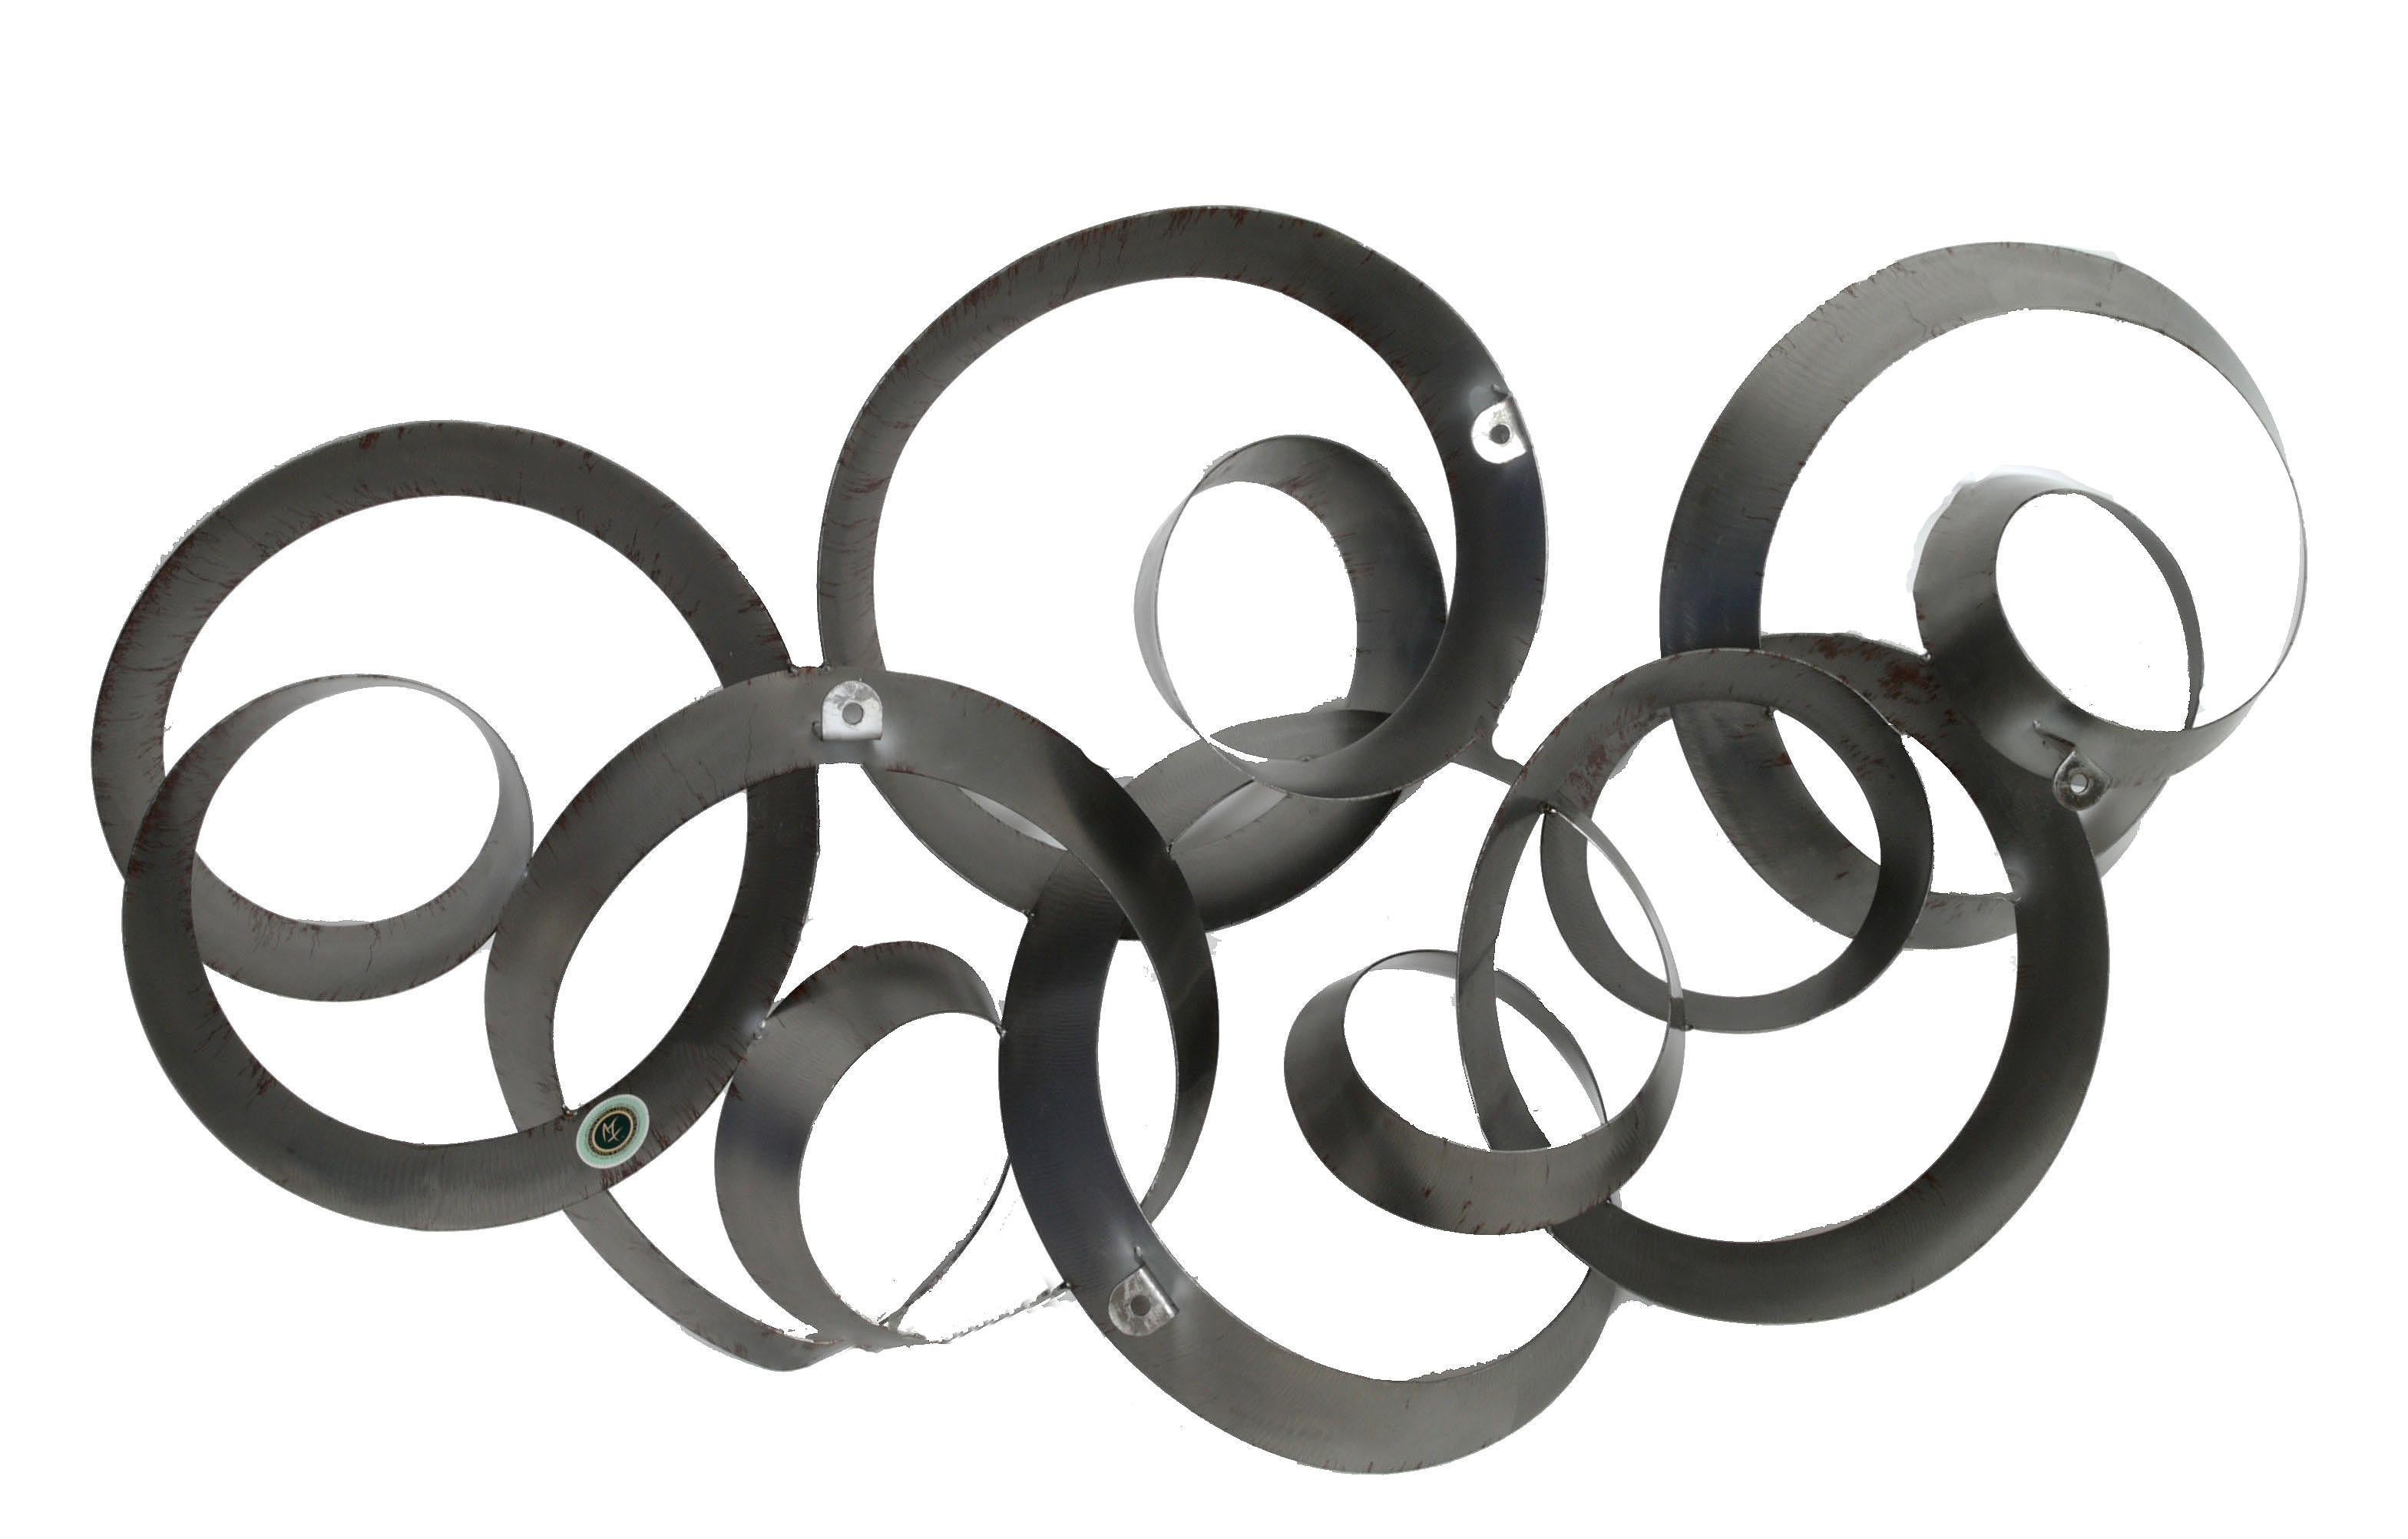 Huge Brutalist handcrafted wall art, sculpture or wall hanging in metal.
Various circular shapes are intertwined with each other.
Marked.